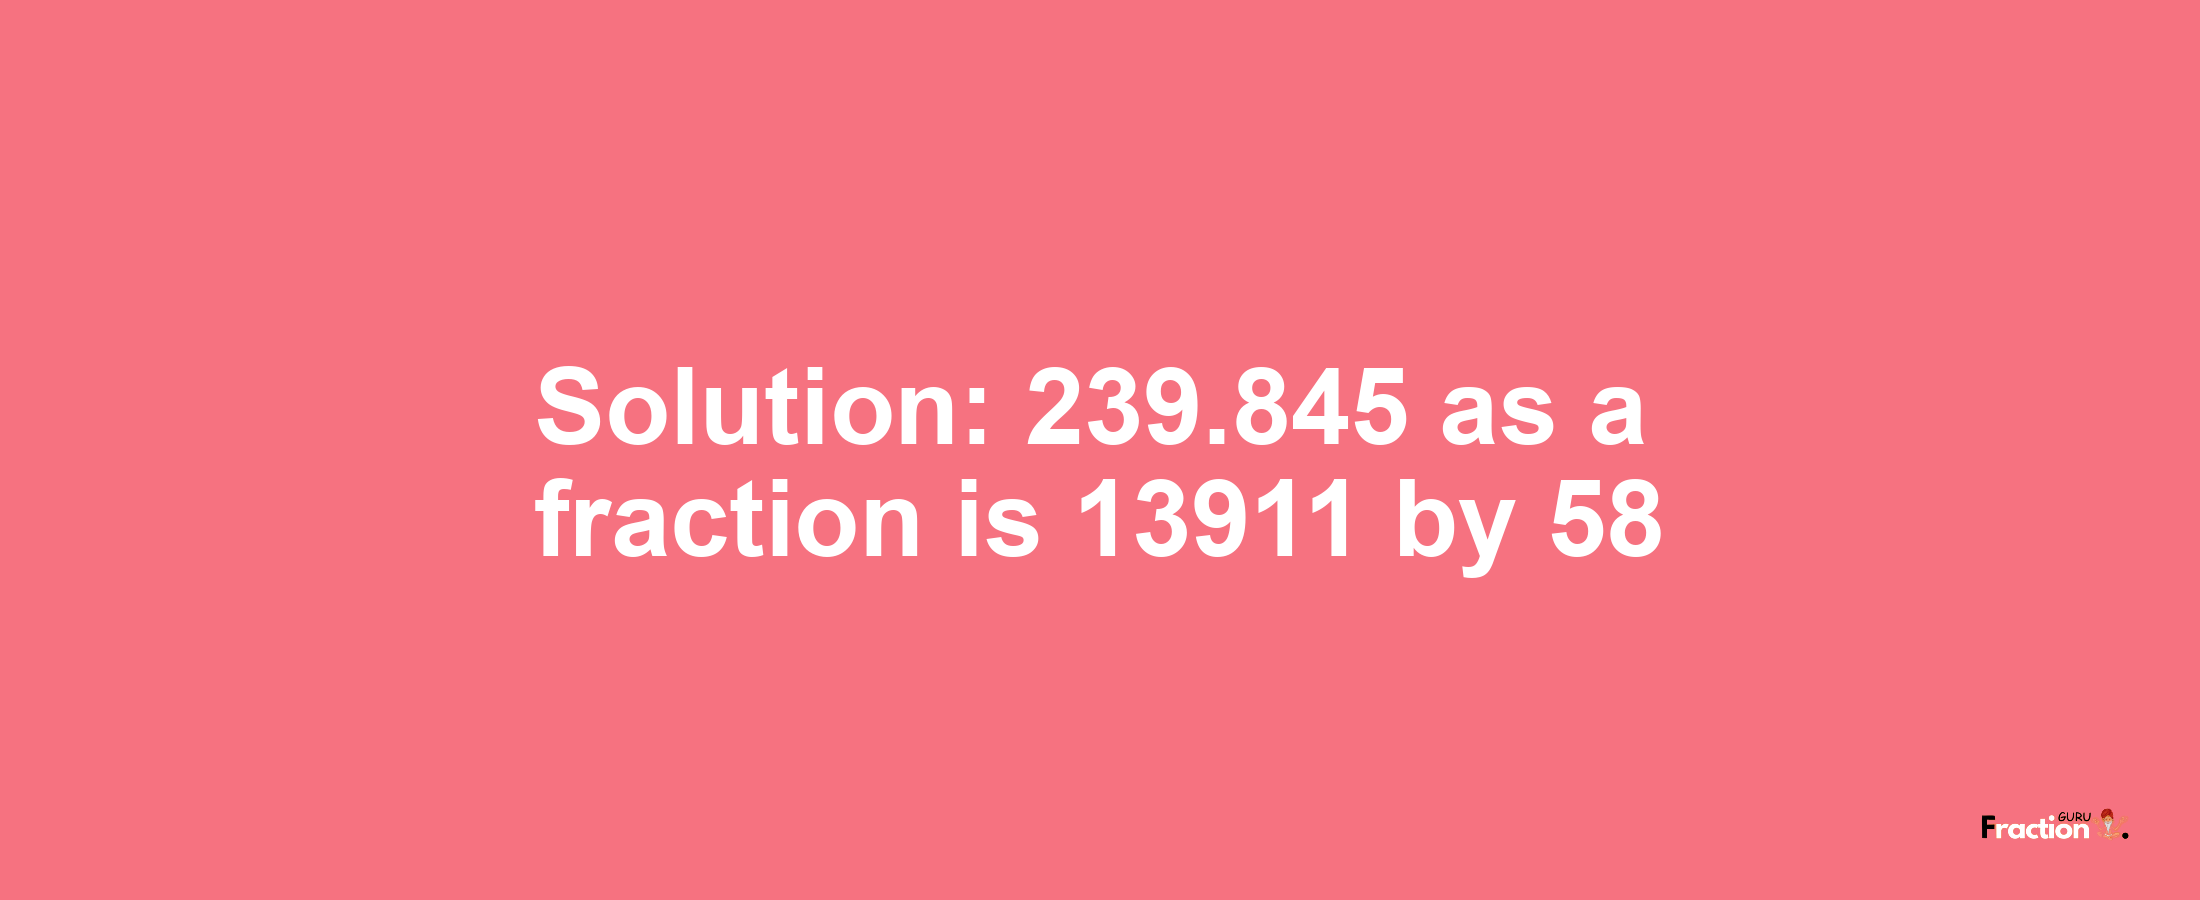 Solution:239.845 as a fraction is 13911/58